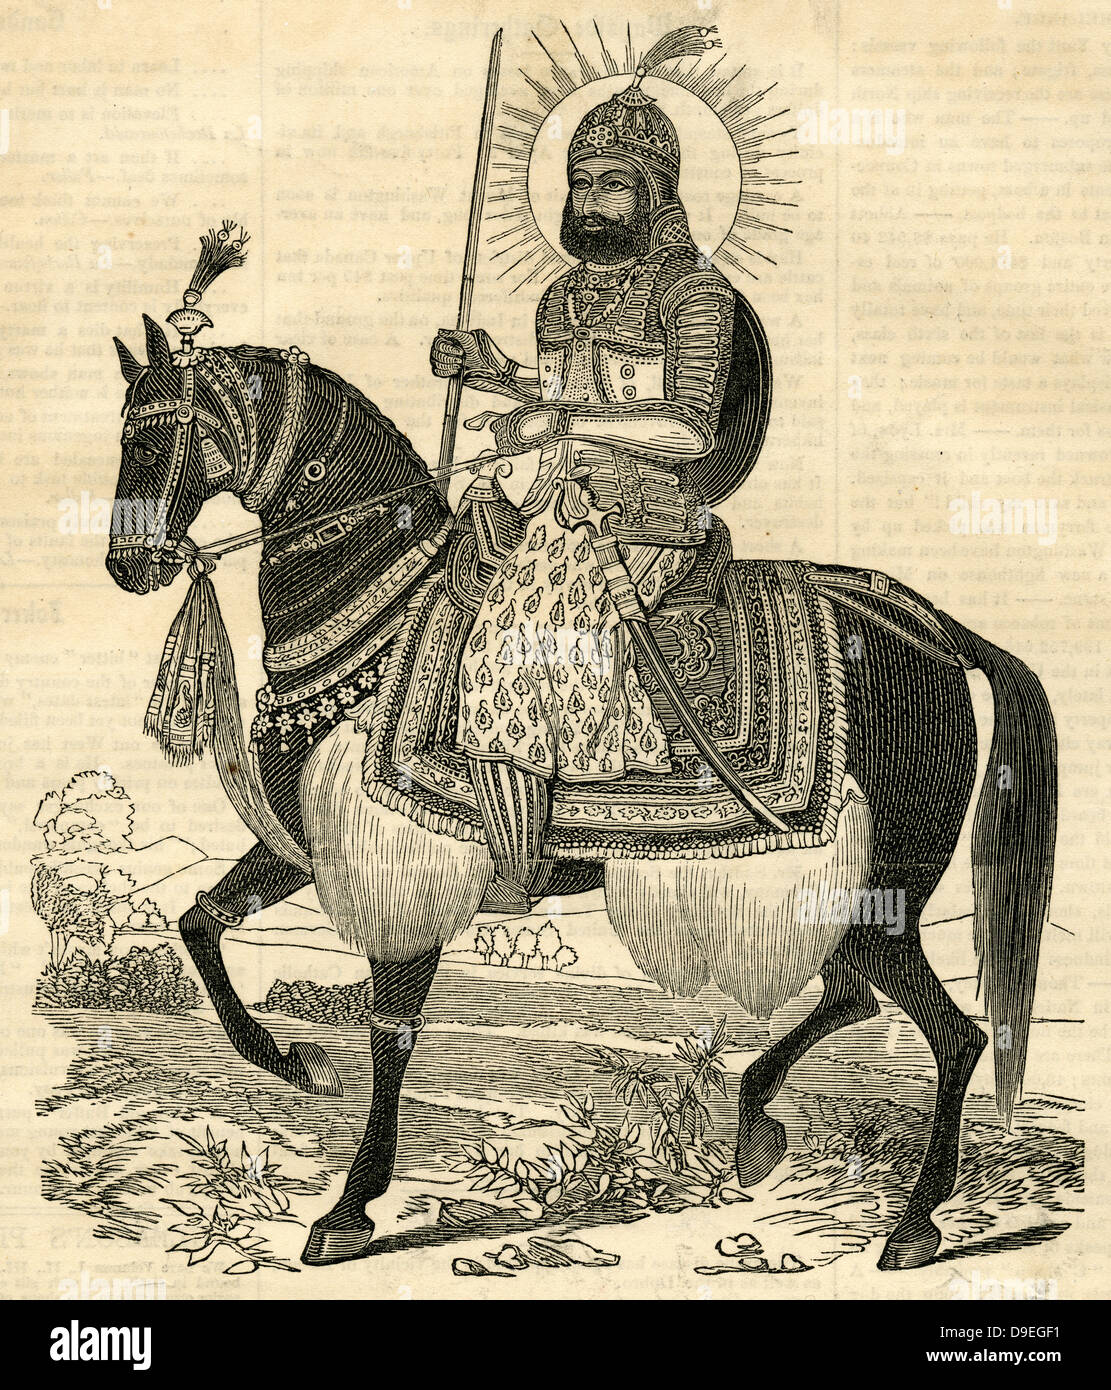 1854 engraving, The Maharaja Karam Singh of Patiala, who reigned from 1813 to 1845. Stock Photo